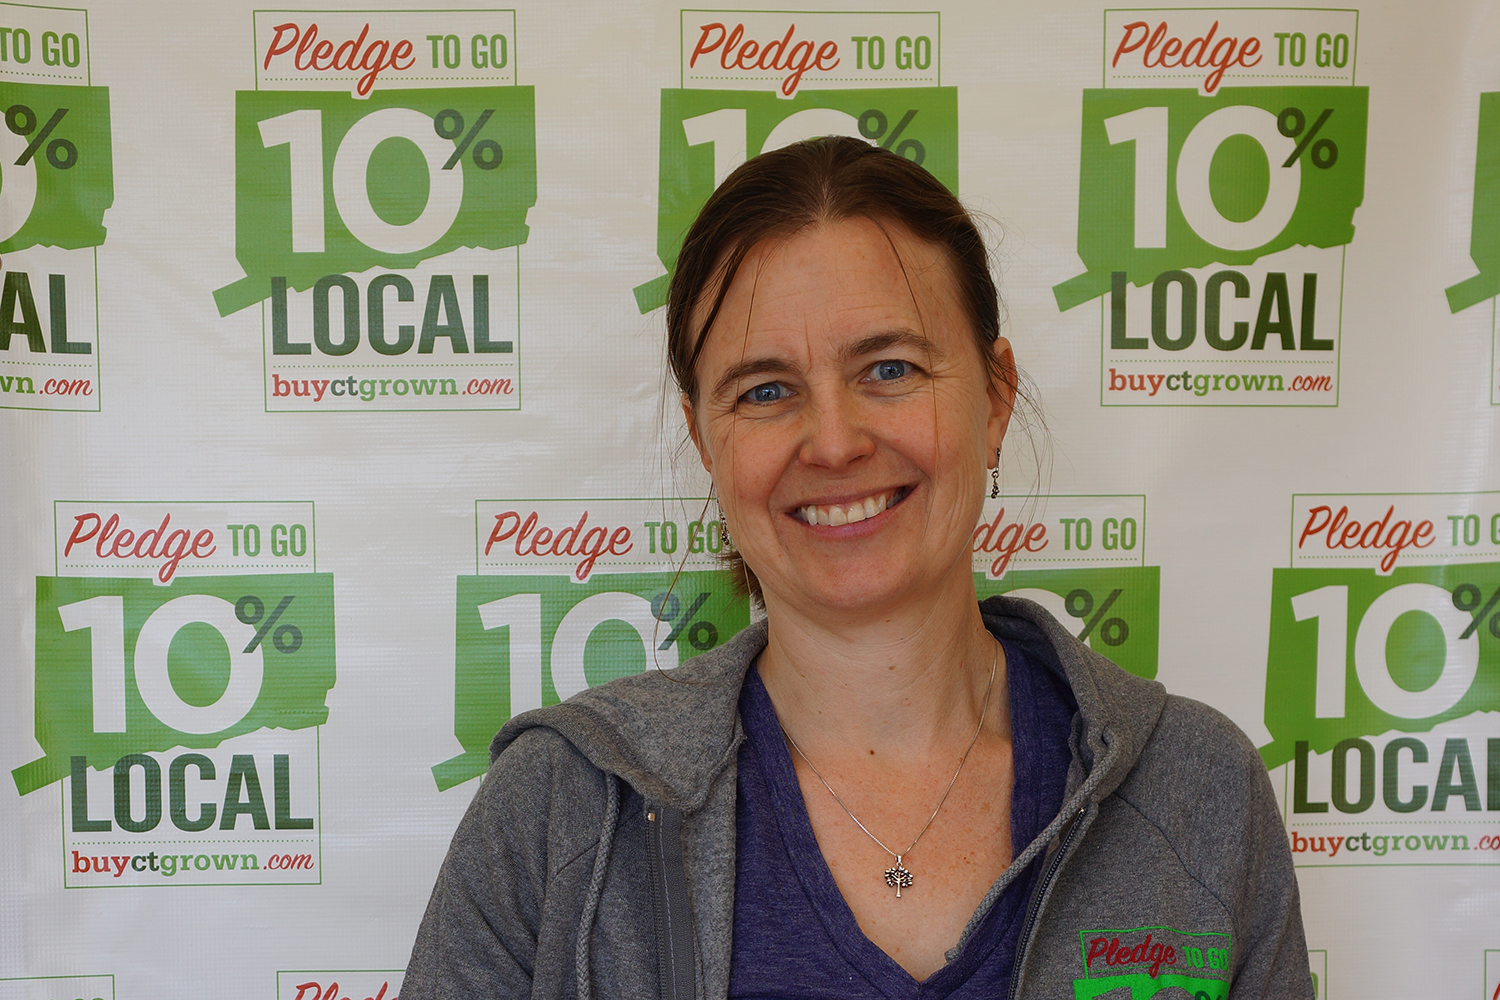 Jiff Martin, an Extension team coordinator for the Pledge to go 10% Local campaign, supports local farms.